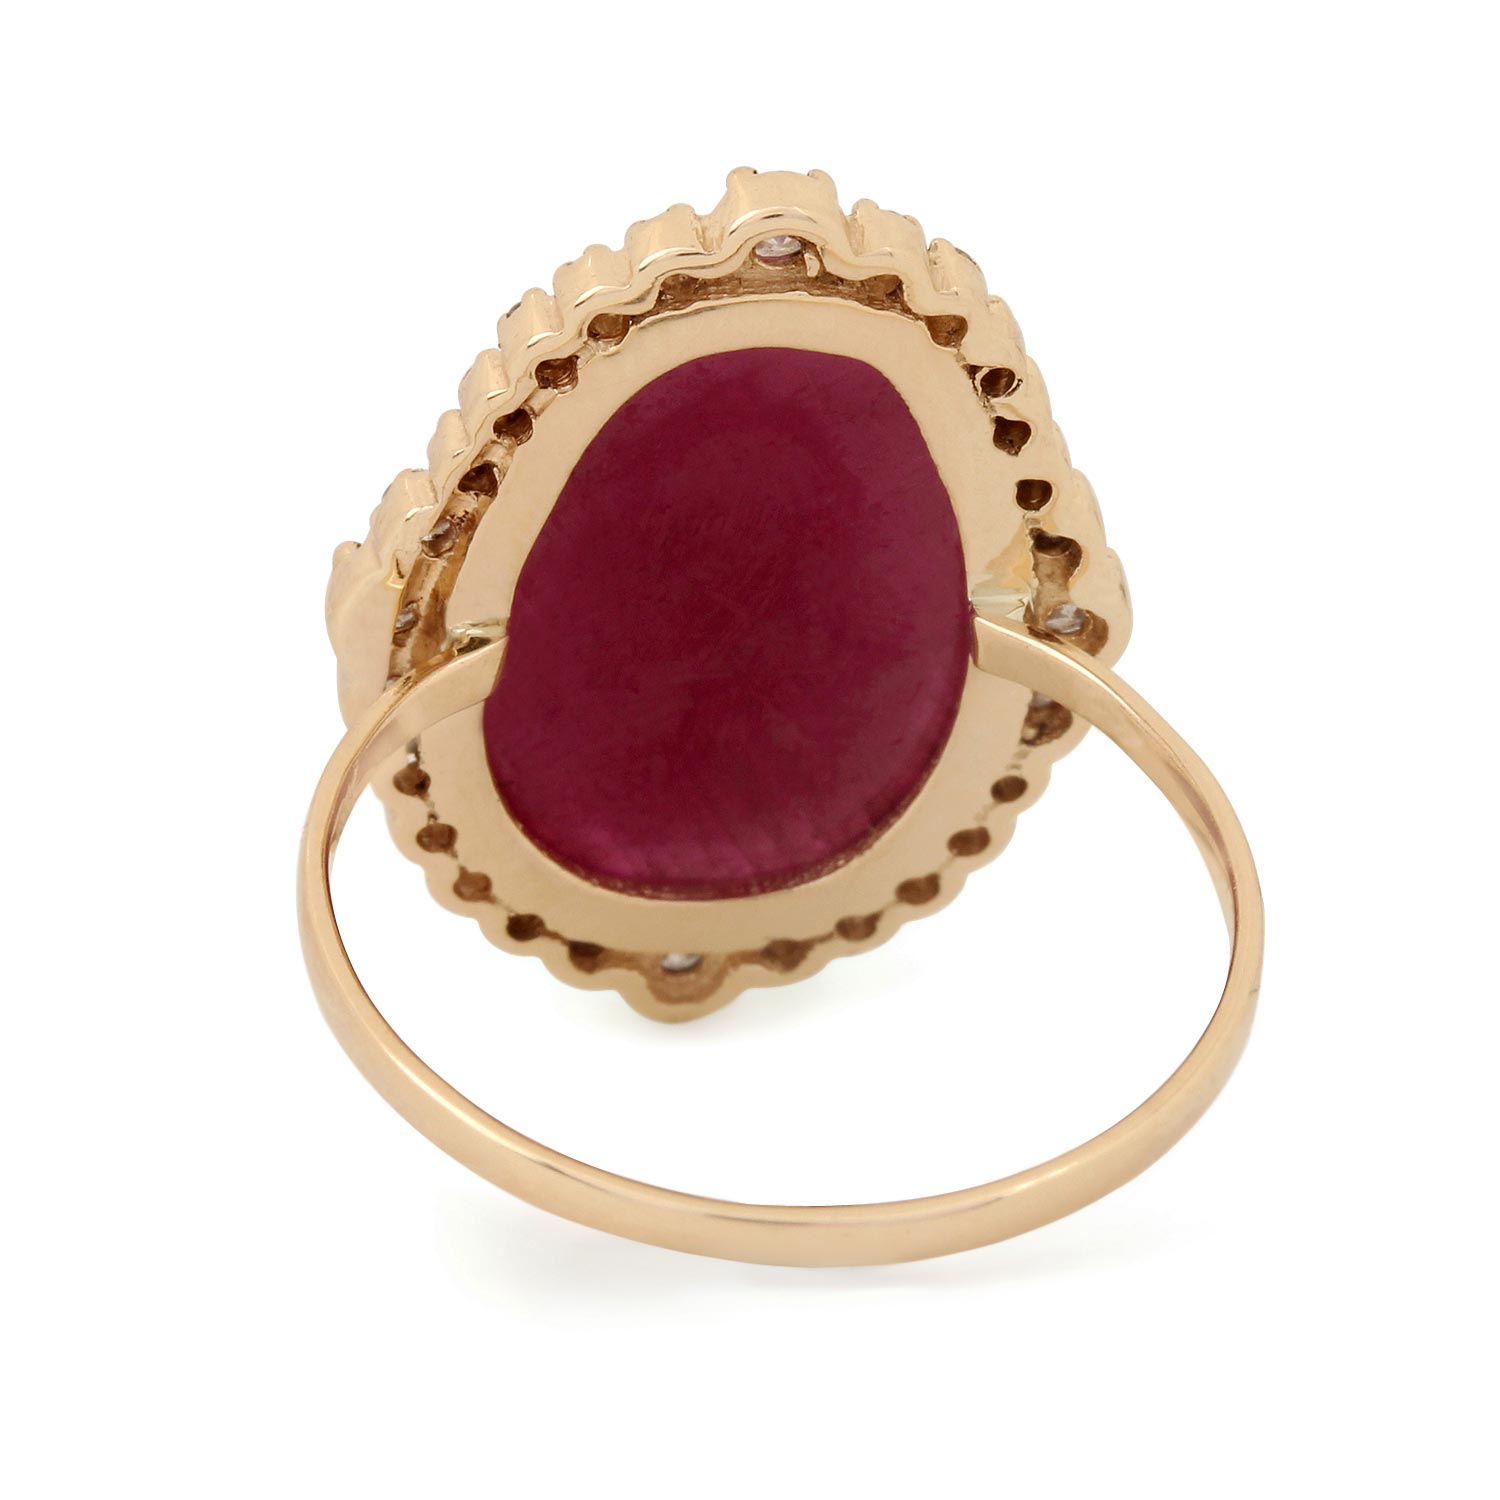 Natural Ruby Gemstone 14K Solid Gold Ring Pave Diamond Jewelry